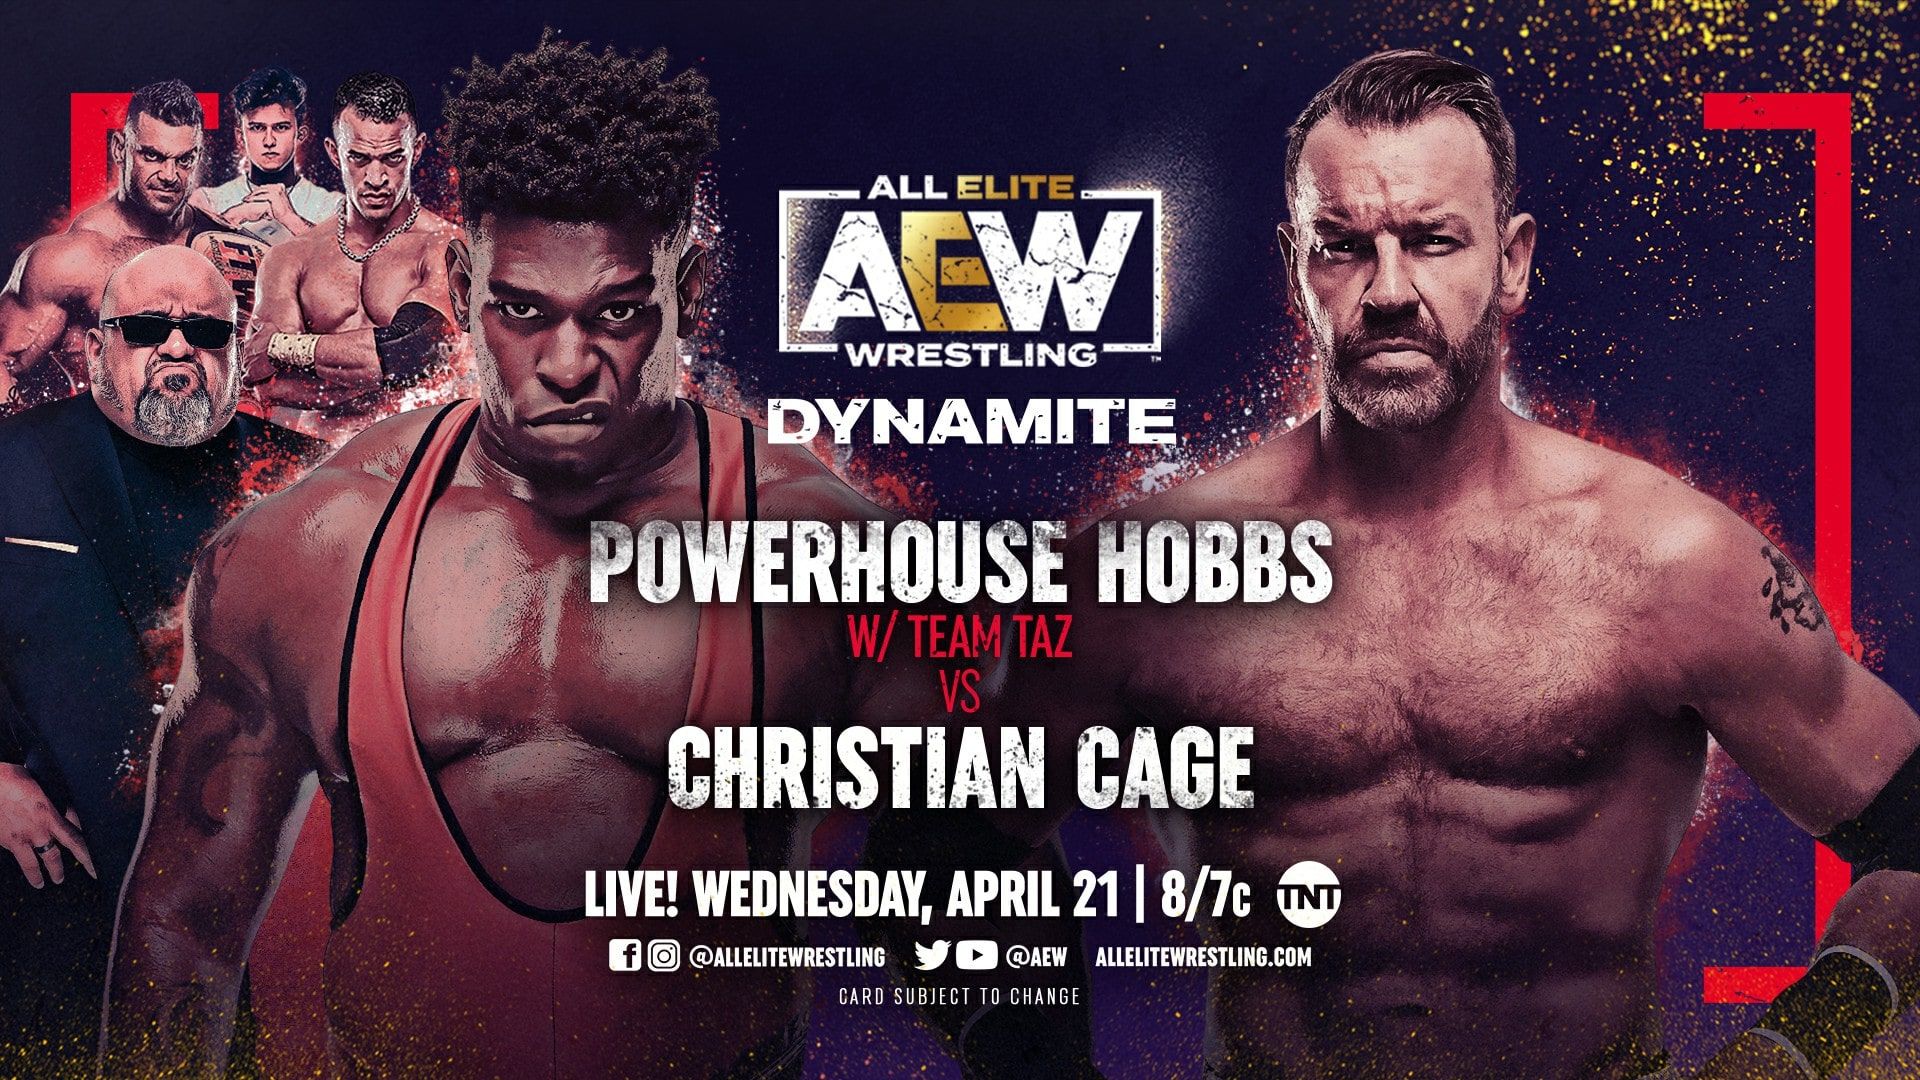 AEW Dynamite Results: Christian Cage Defeats Powerhouse Hobbs Via The Killswitch